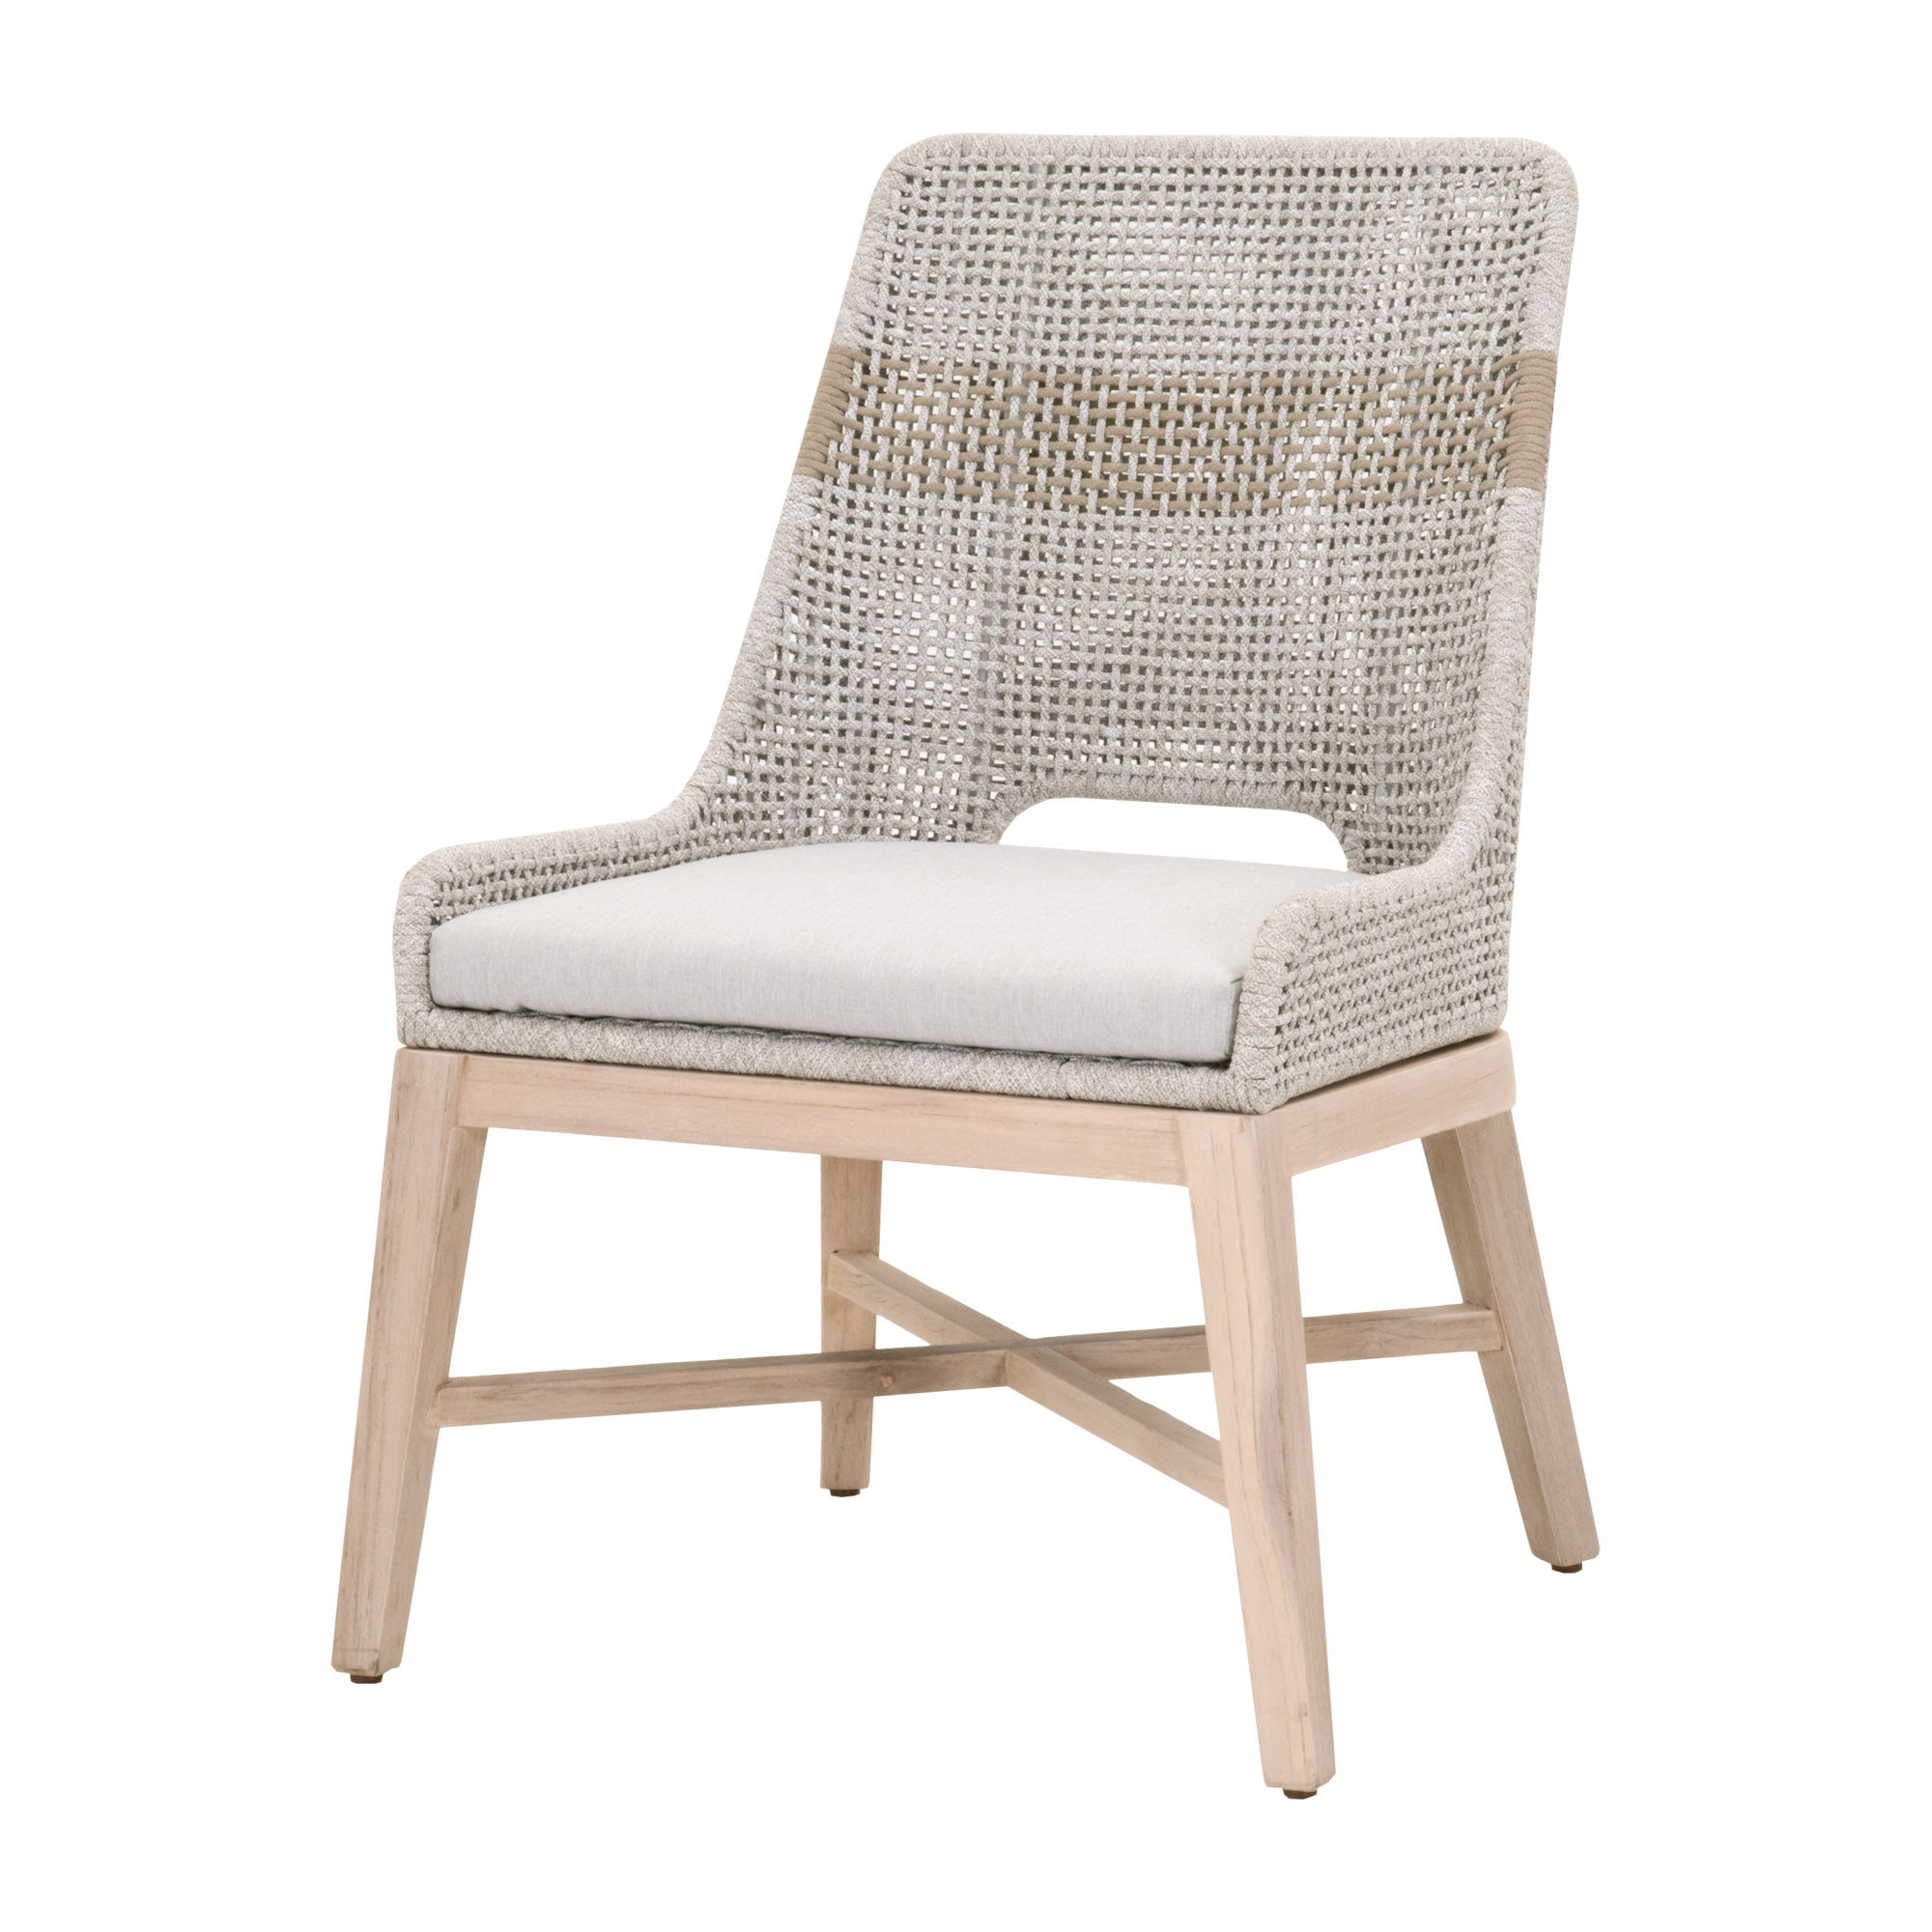 25" Set Of Two Taupe And Natural Solid Wood Dining Chair With Gray Cushion - Tuesday Morning-Outdoor Chairs